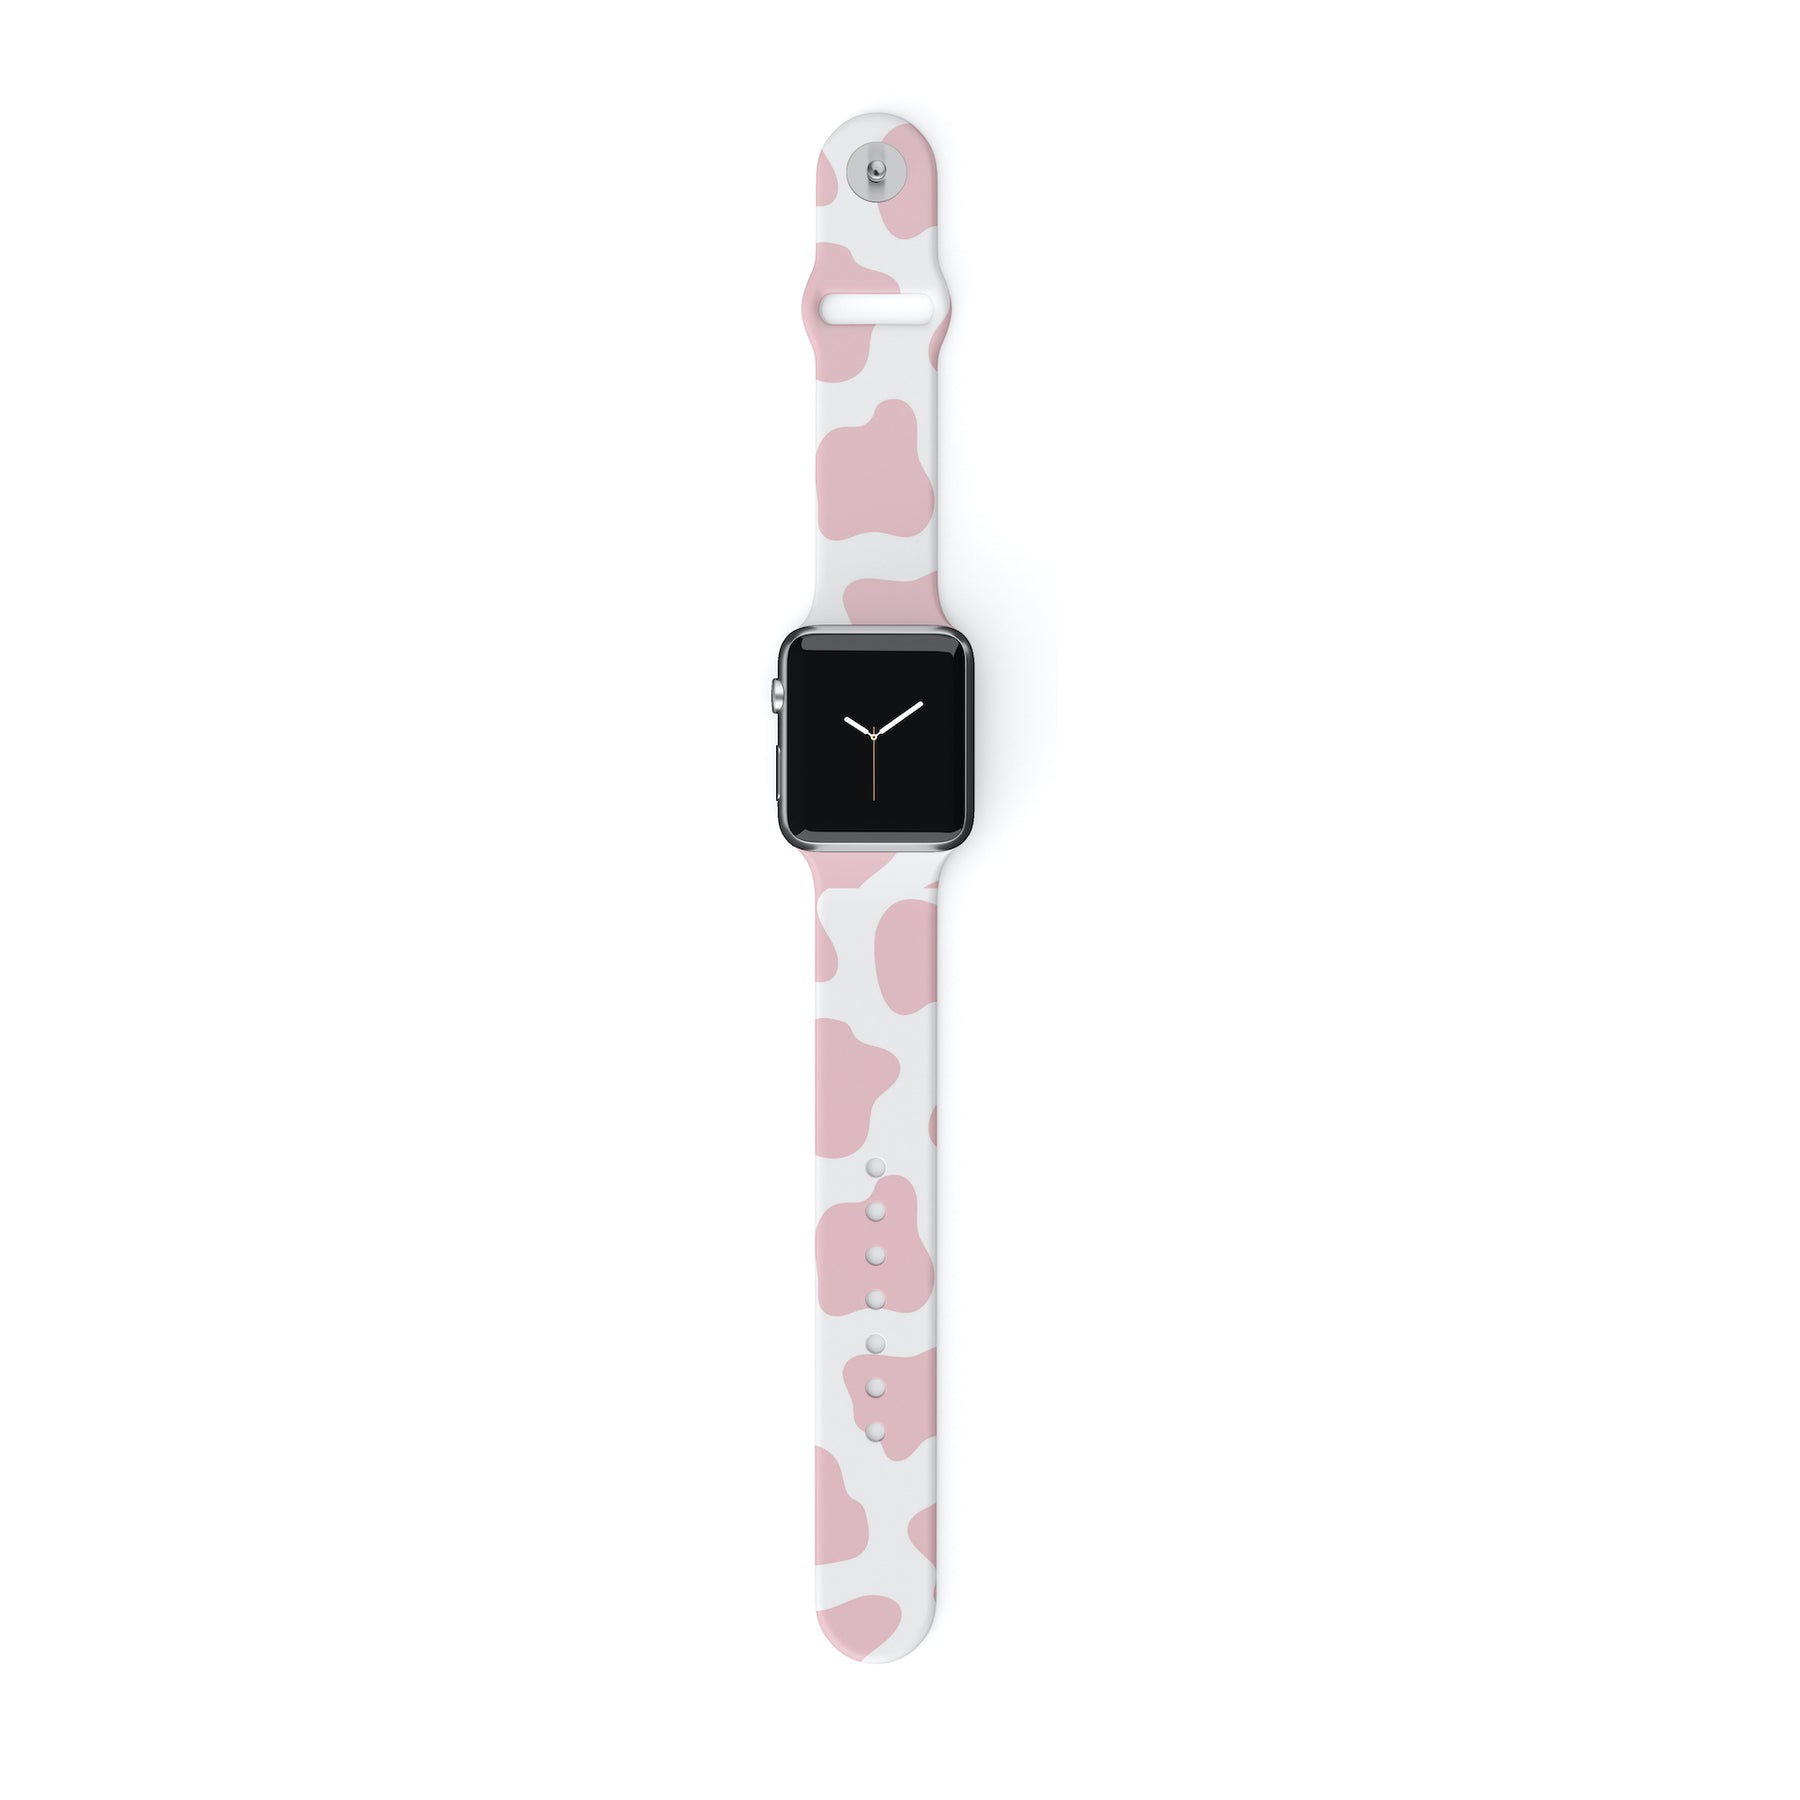 Cow Print Pink Apple Watch Strap - thefonecasecompany